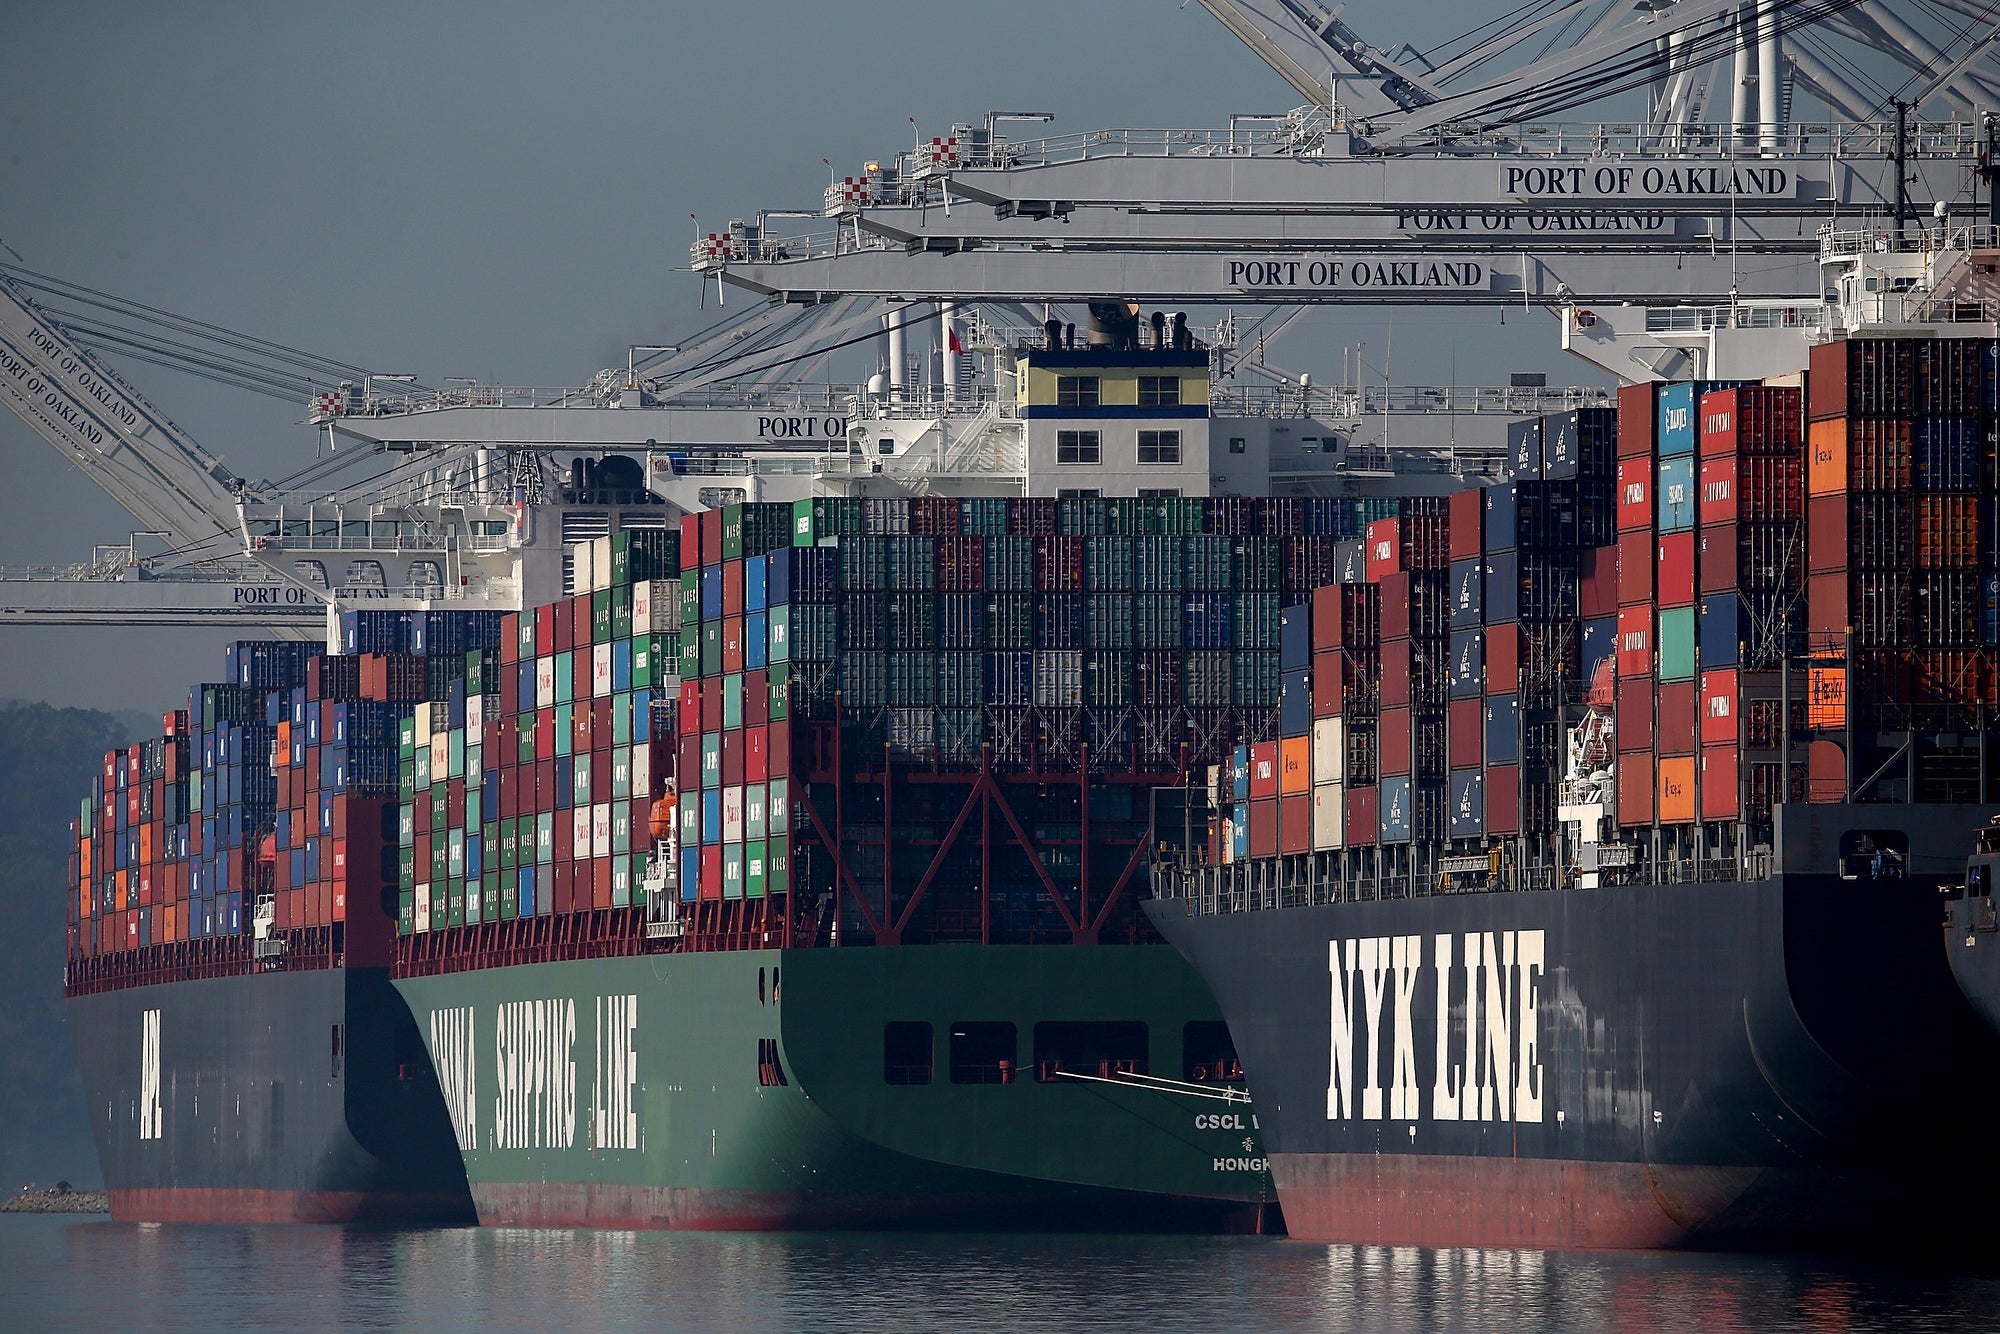 Three large container ships next to each other, stacked with containers.